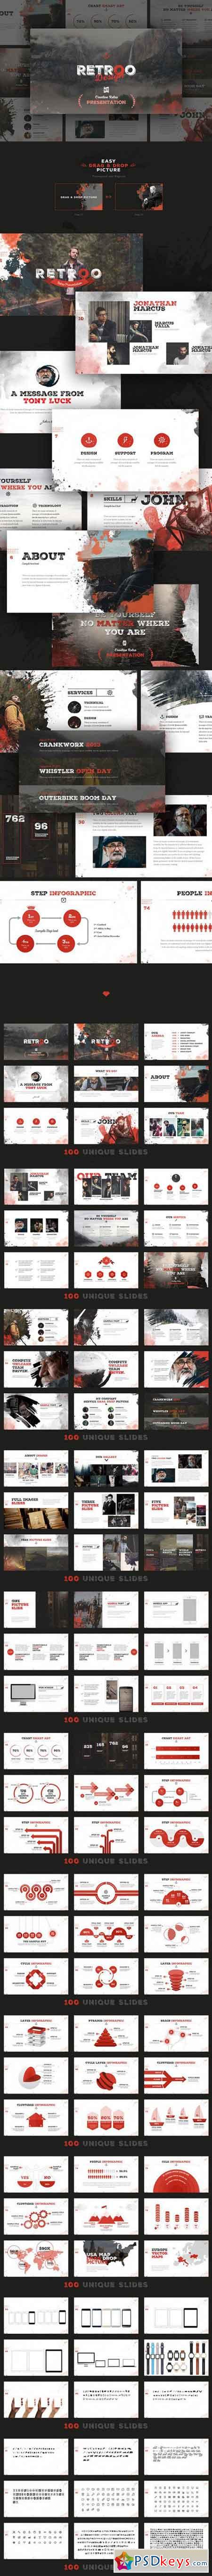 RETROO Powerpoint Template 887883